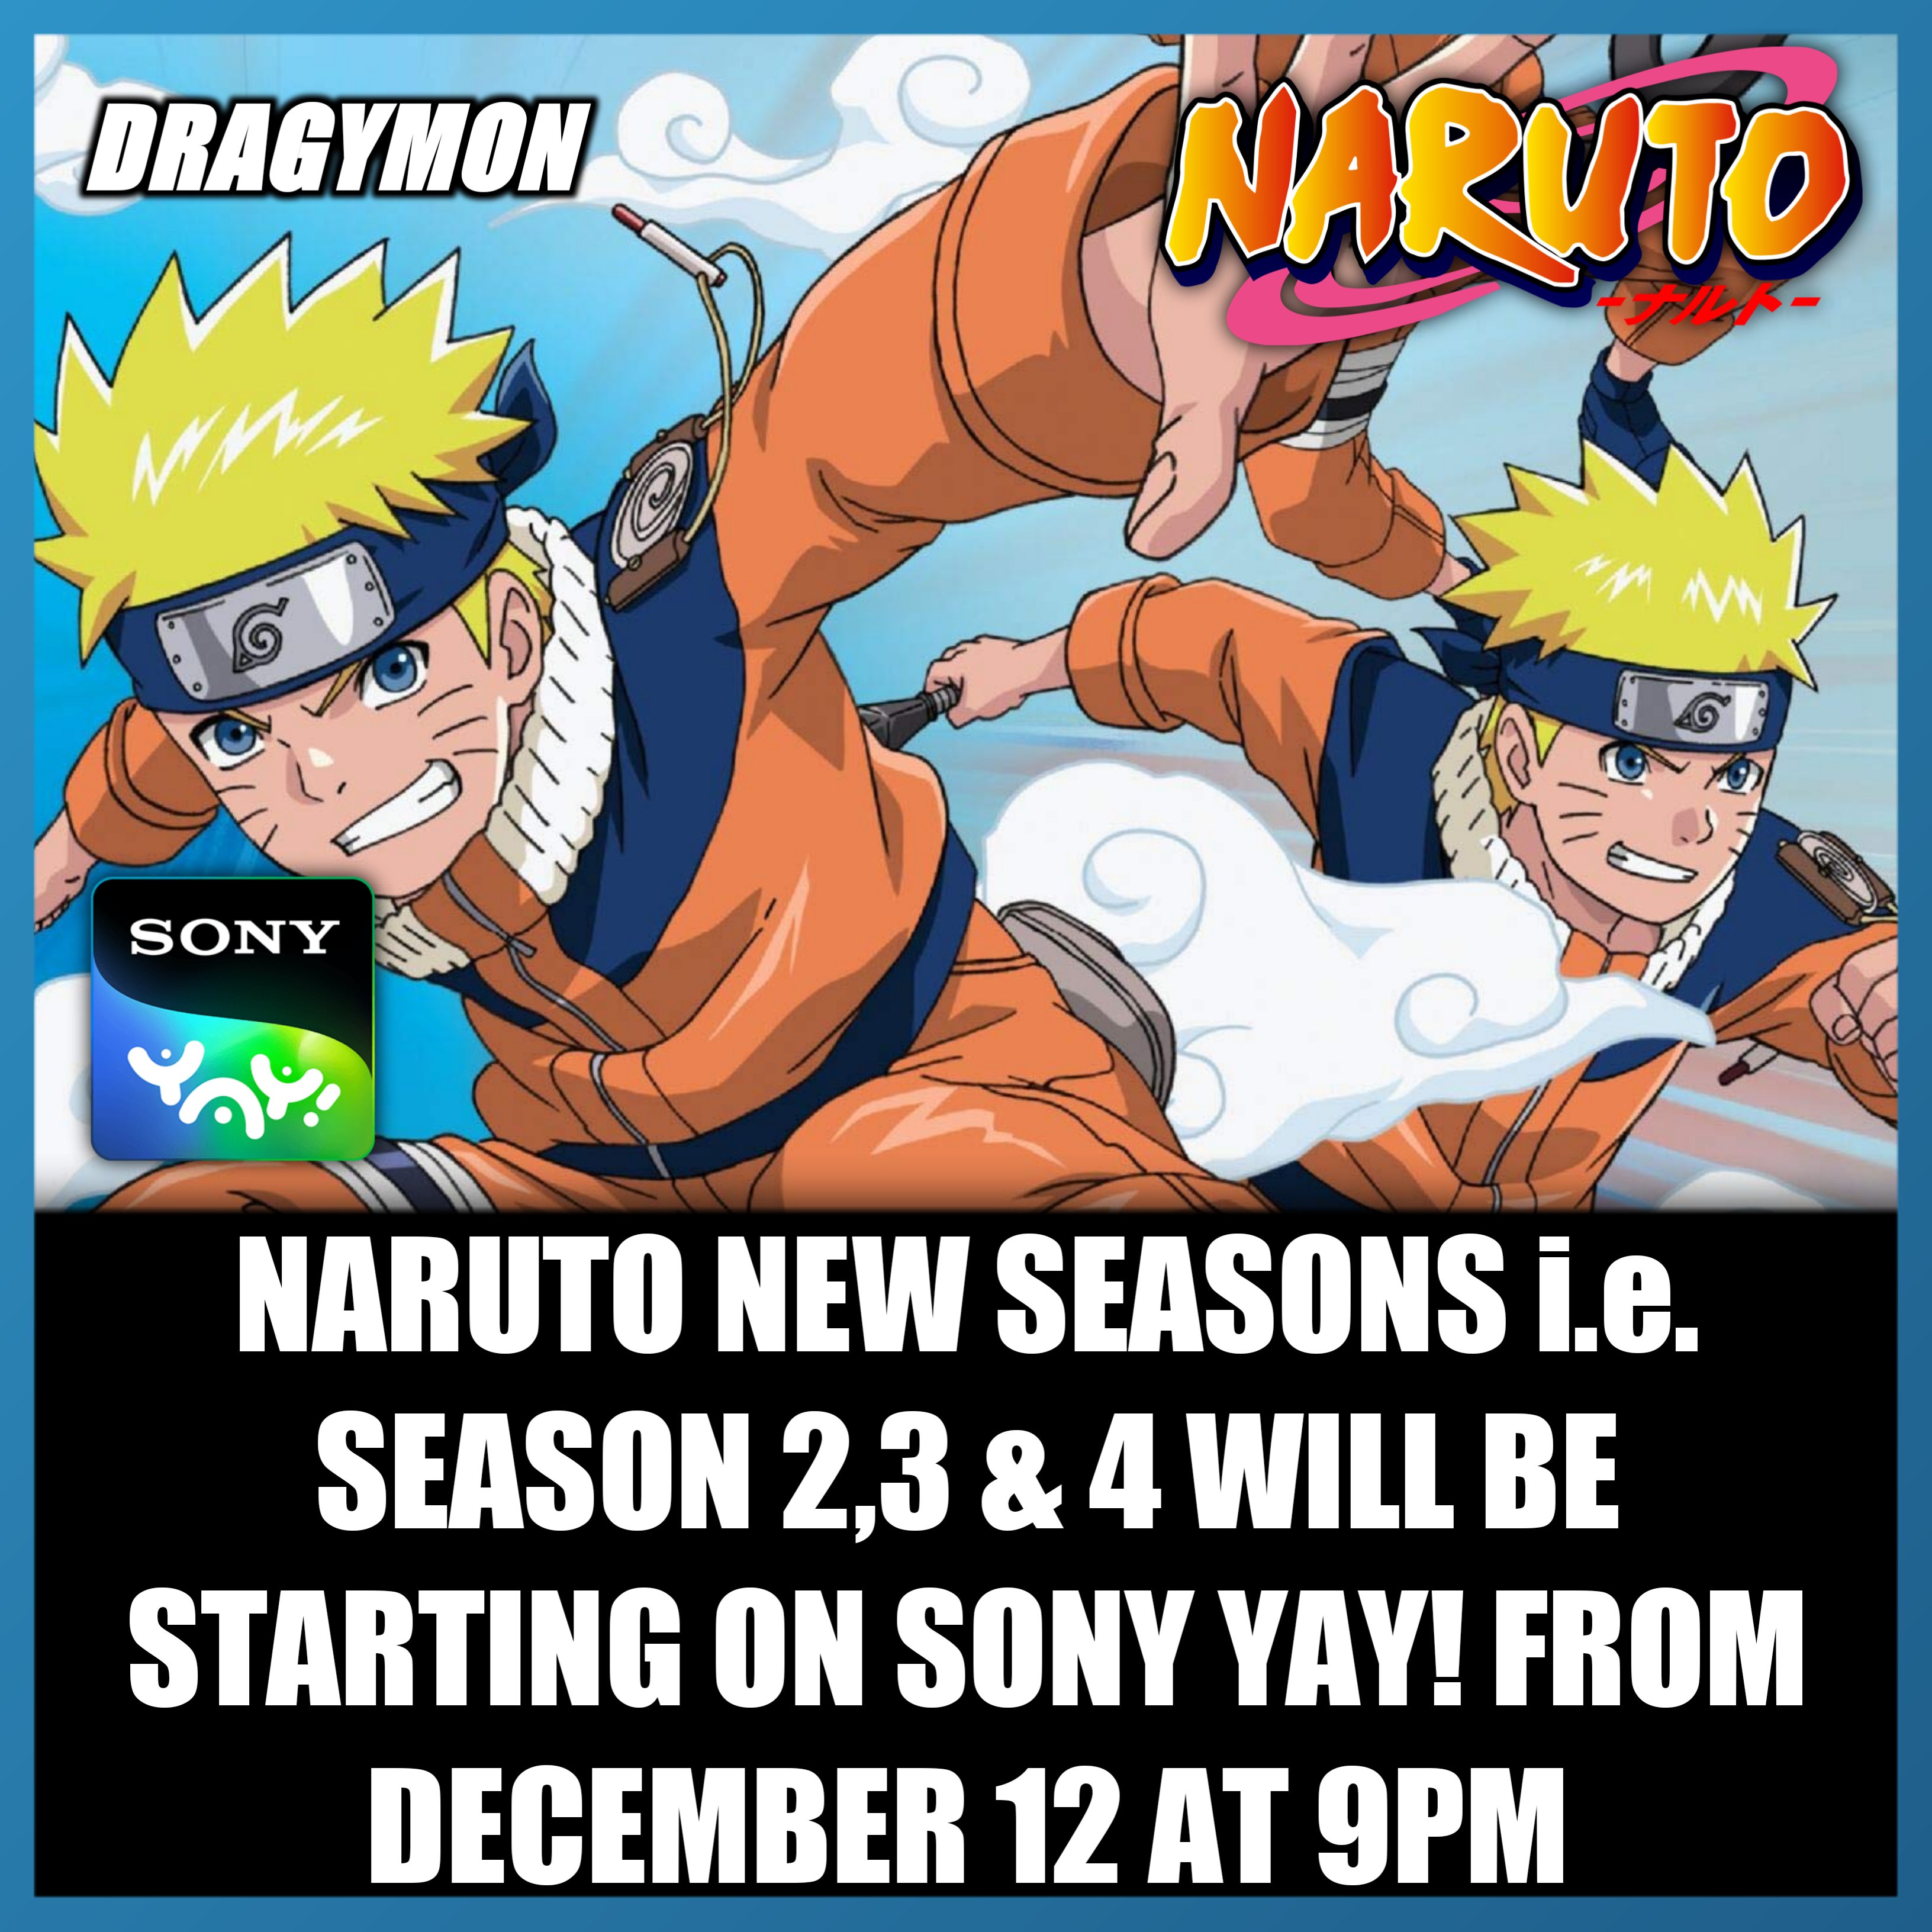 Sony Yay! launches Japanese anime series 'Naruto' on 15 August